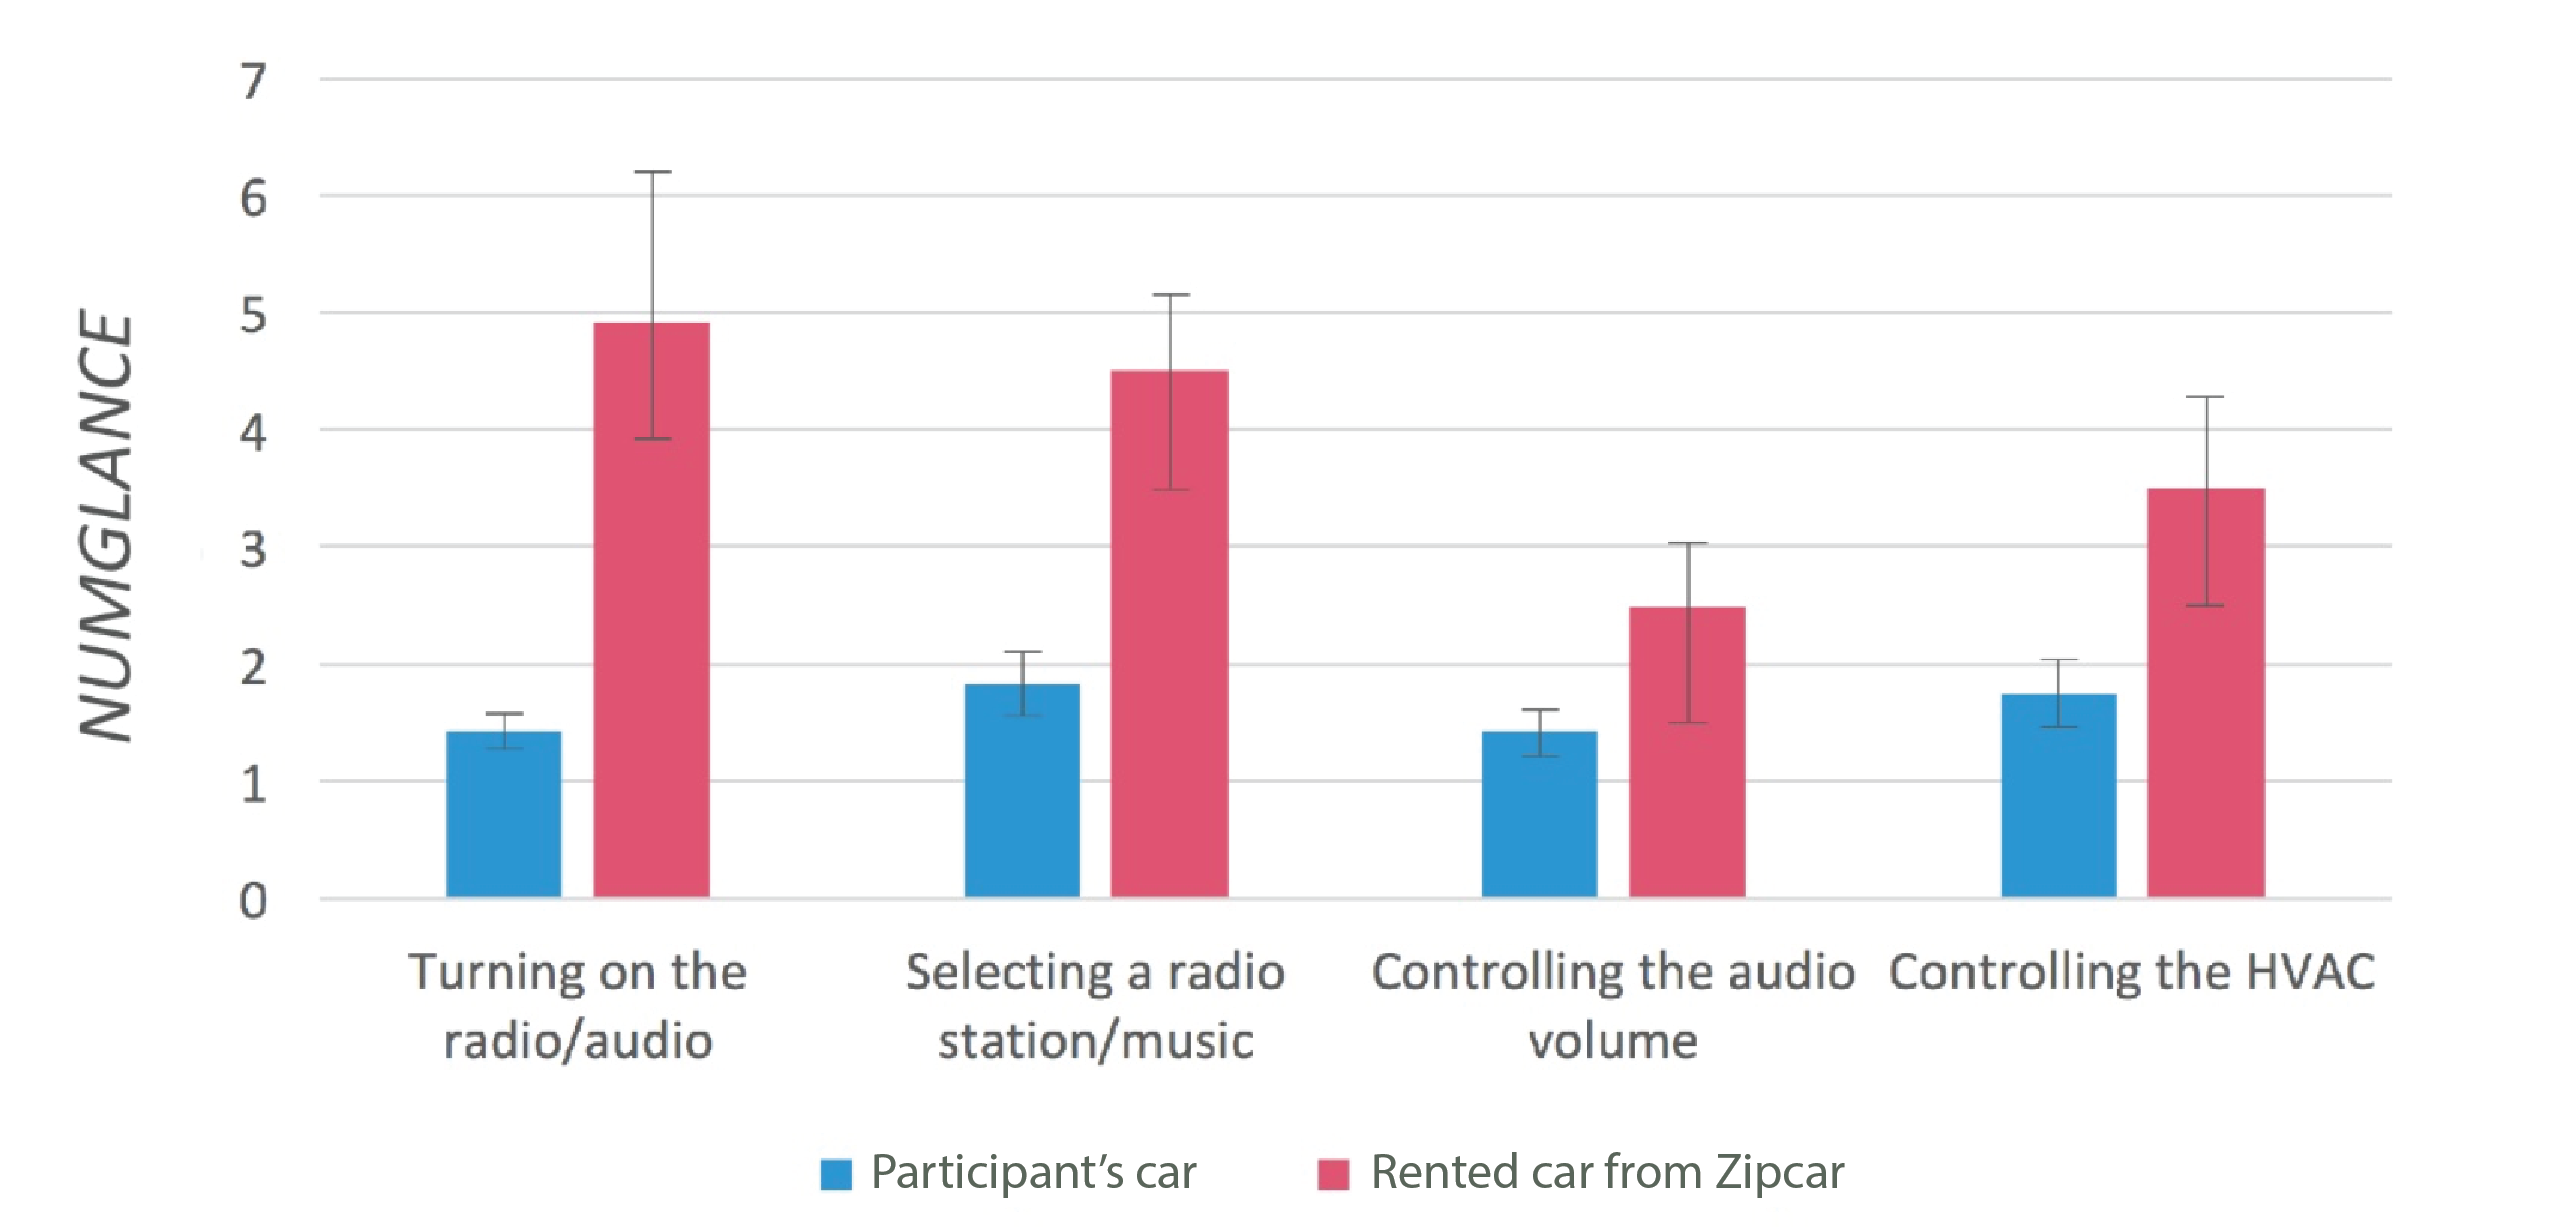 Bar chart showing that rented cars have a higher number of glances than in the participant's own car.